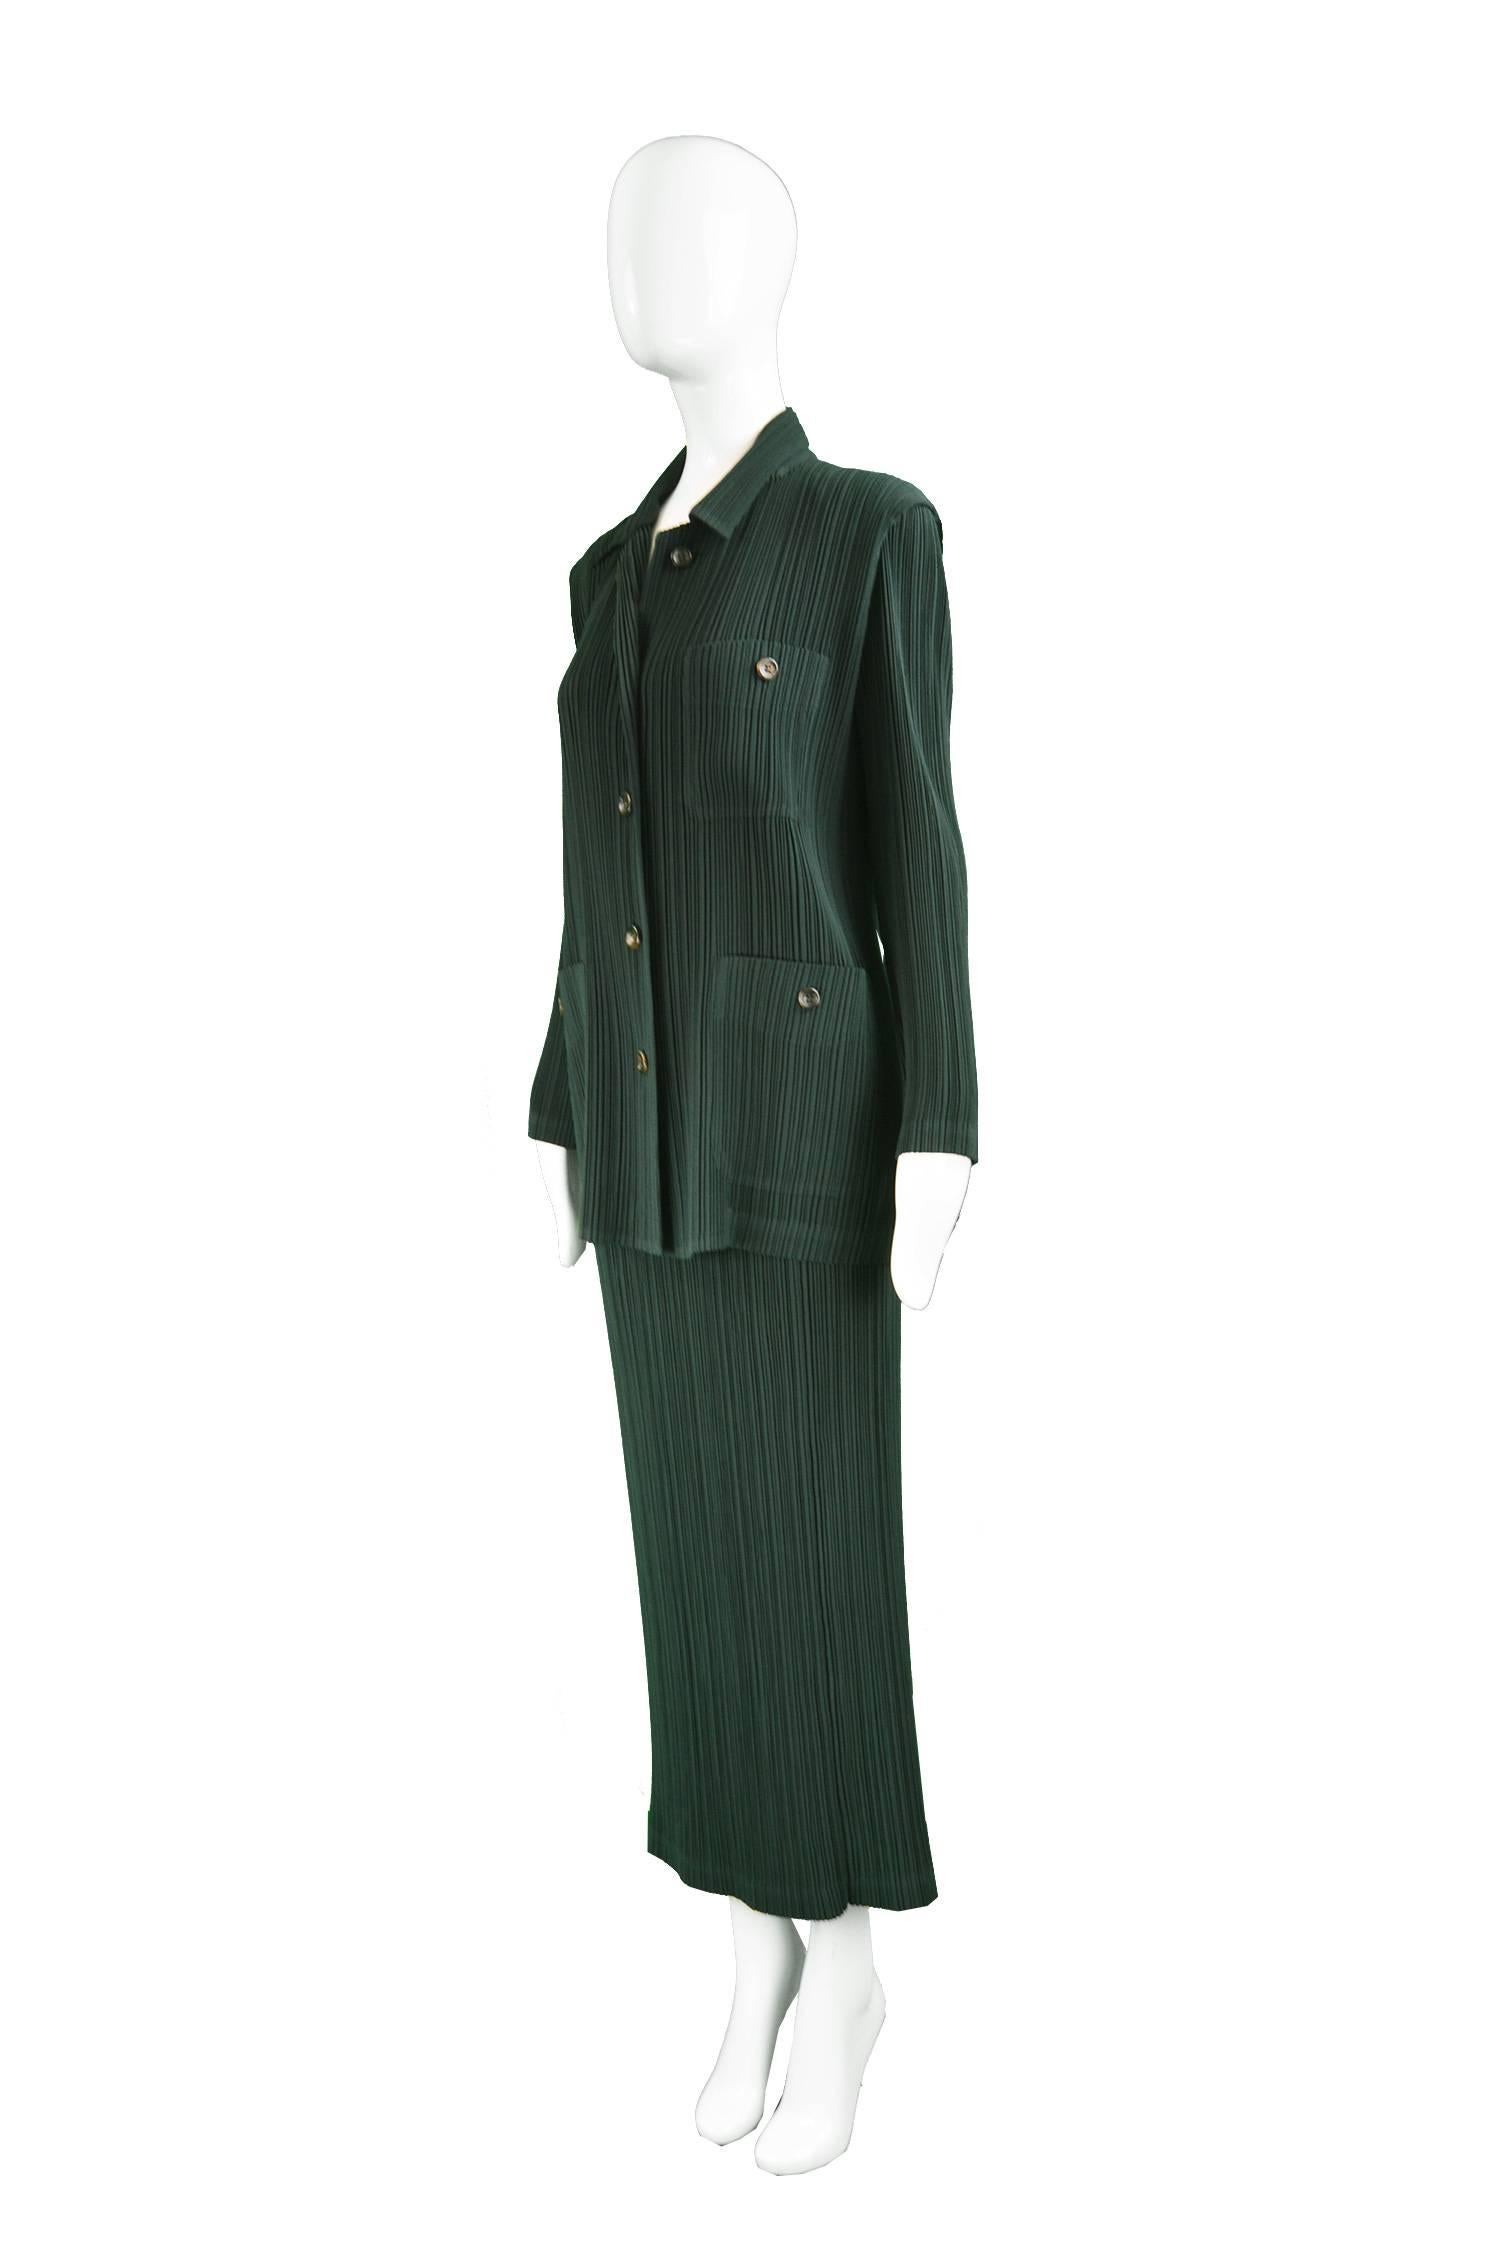 Issey Miyake Vintage Two Piece Pleated Jacket & Dress / Skirt Set, 1990s In Excellent Condition For Sale In Doncaster, South Yorkshire